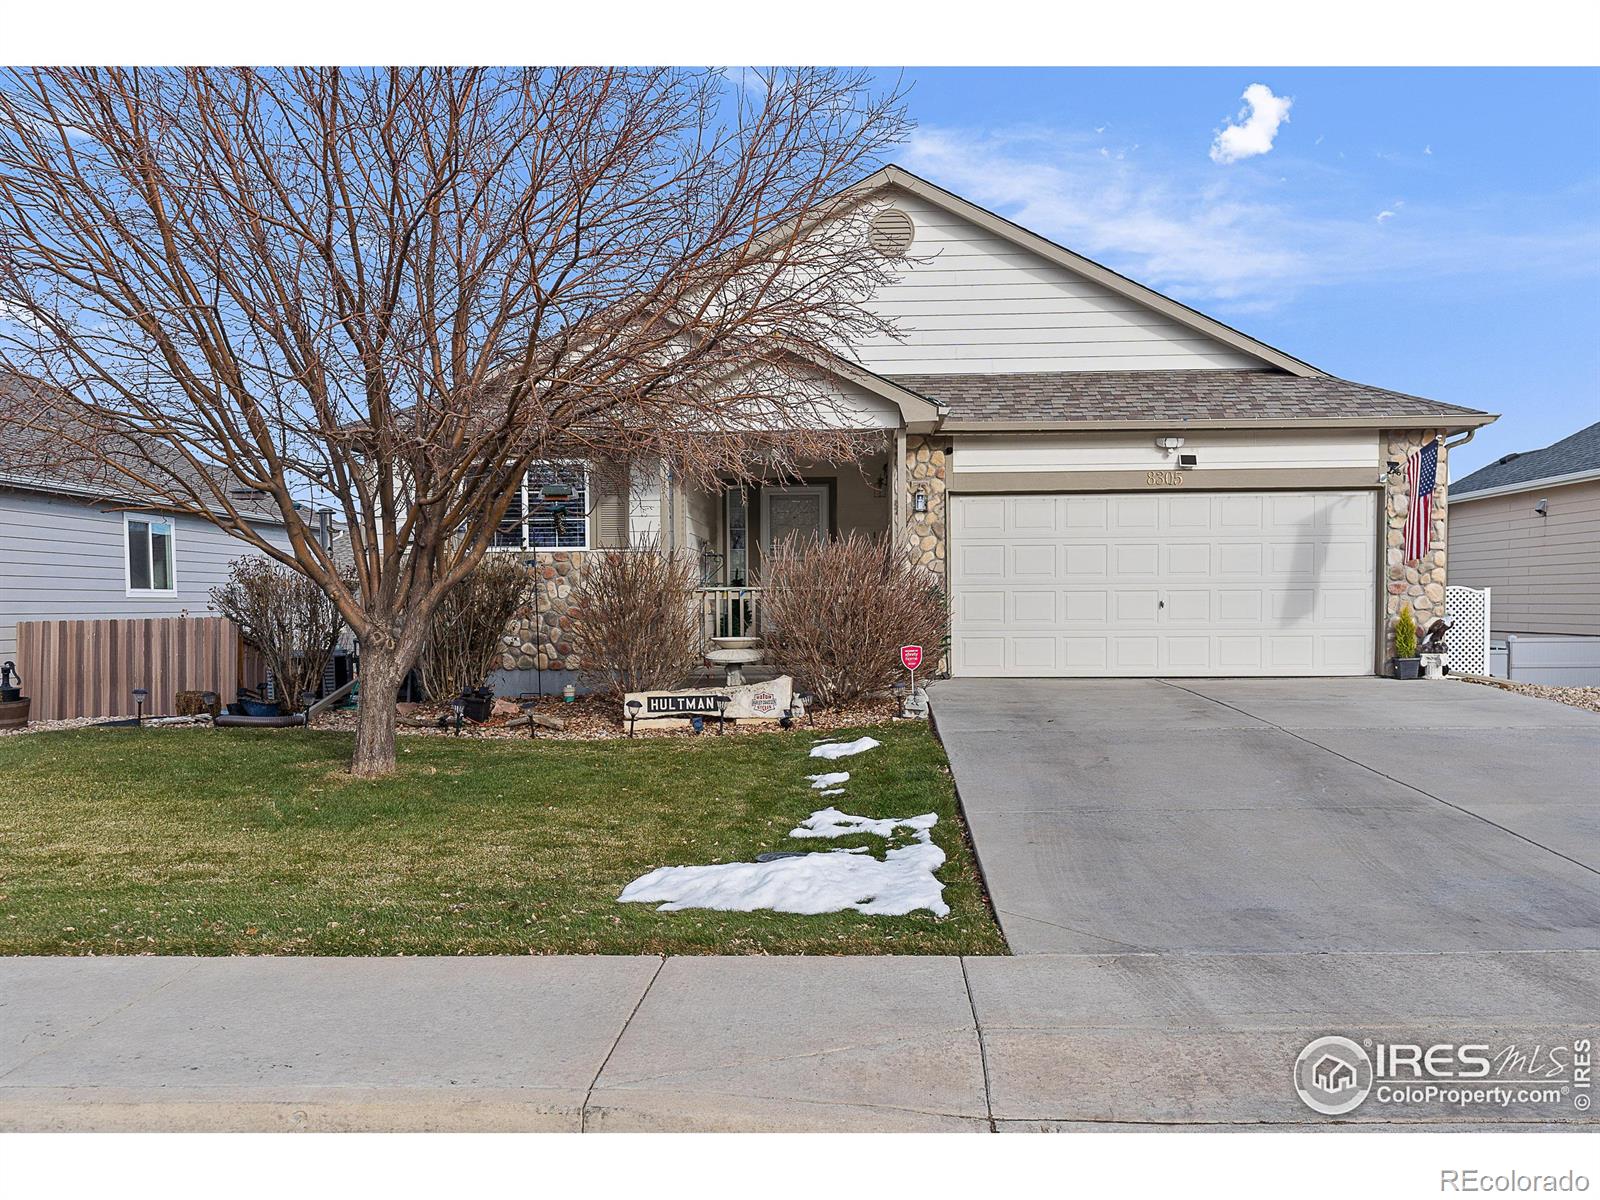 8305  18th St Rd, greeley MLS: 4567891001640 Beds: 2 Baths: 2 Price: $430,000